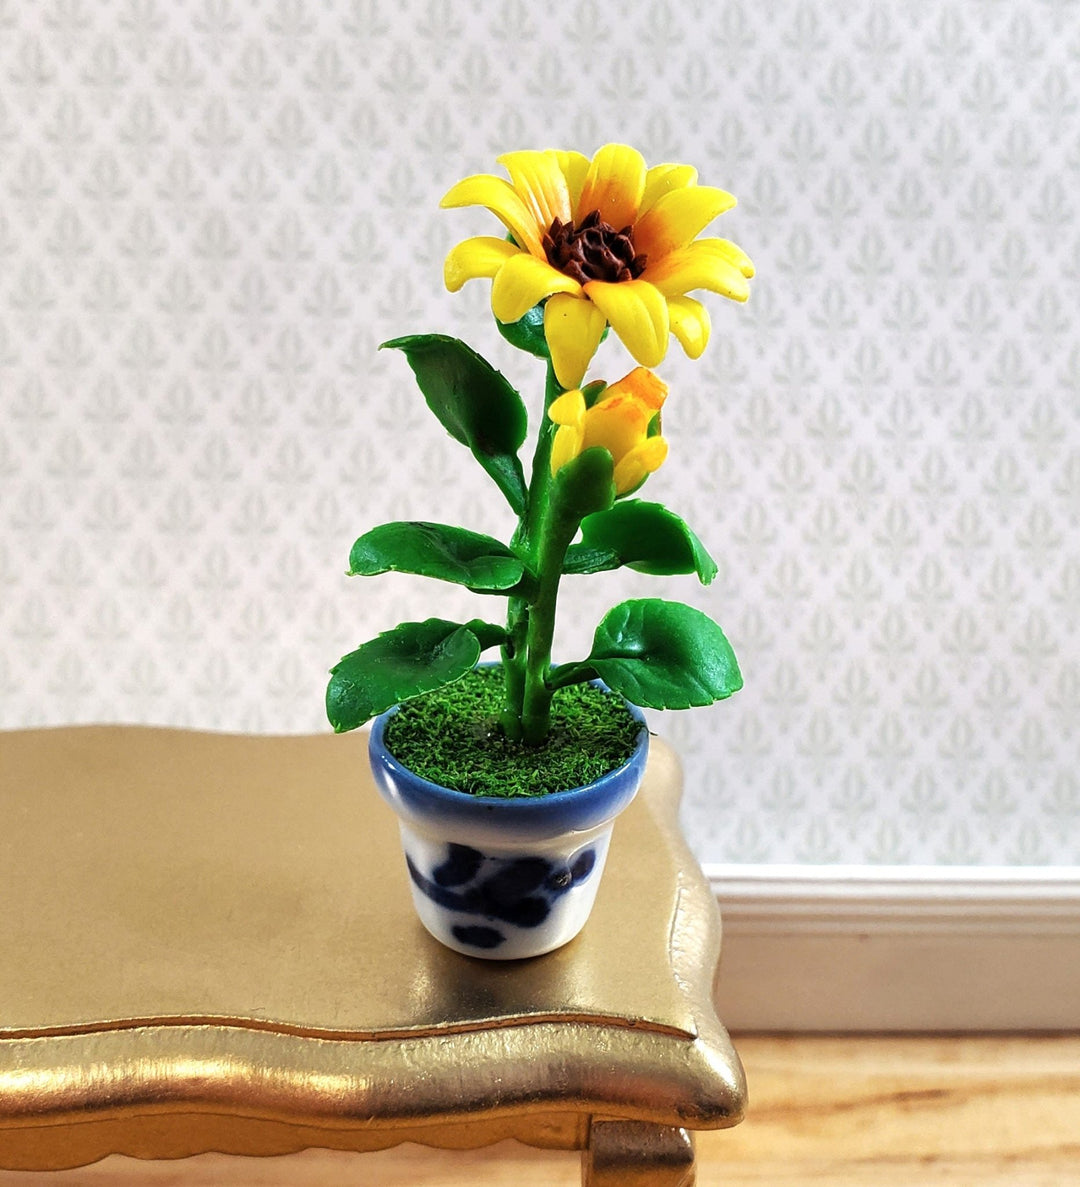 Miniature Flowers . Sunflower 1:12 Scale , Accessories for a Dollhouse.  Miniature Potted Plants. 